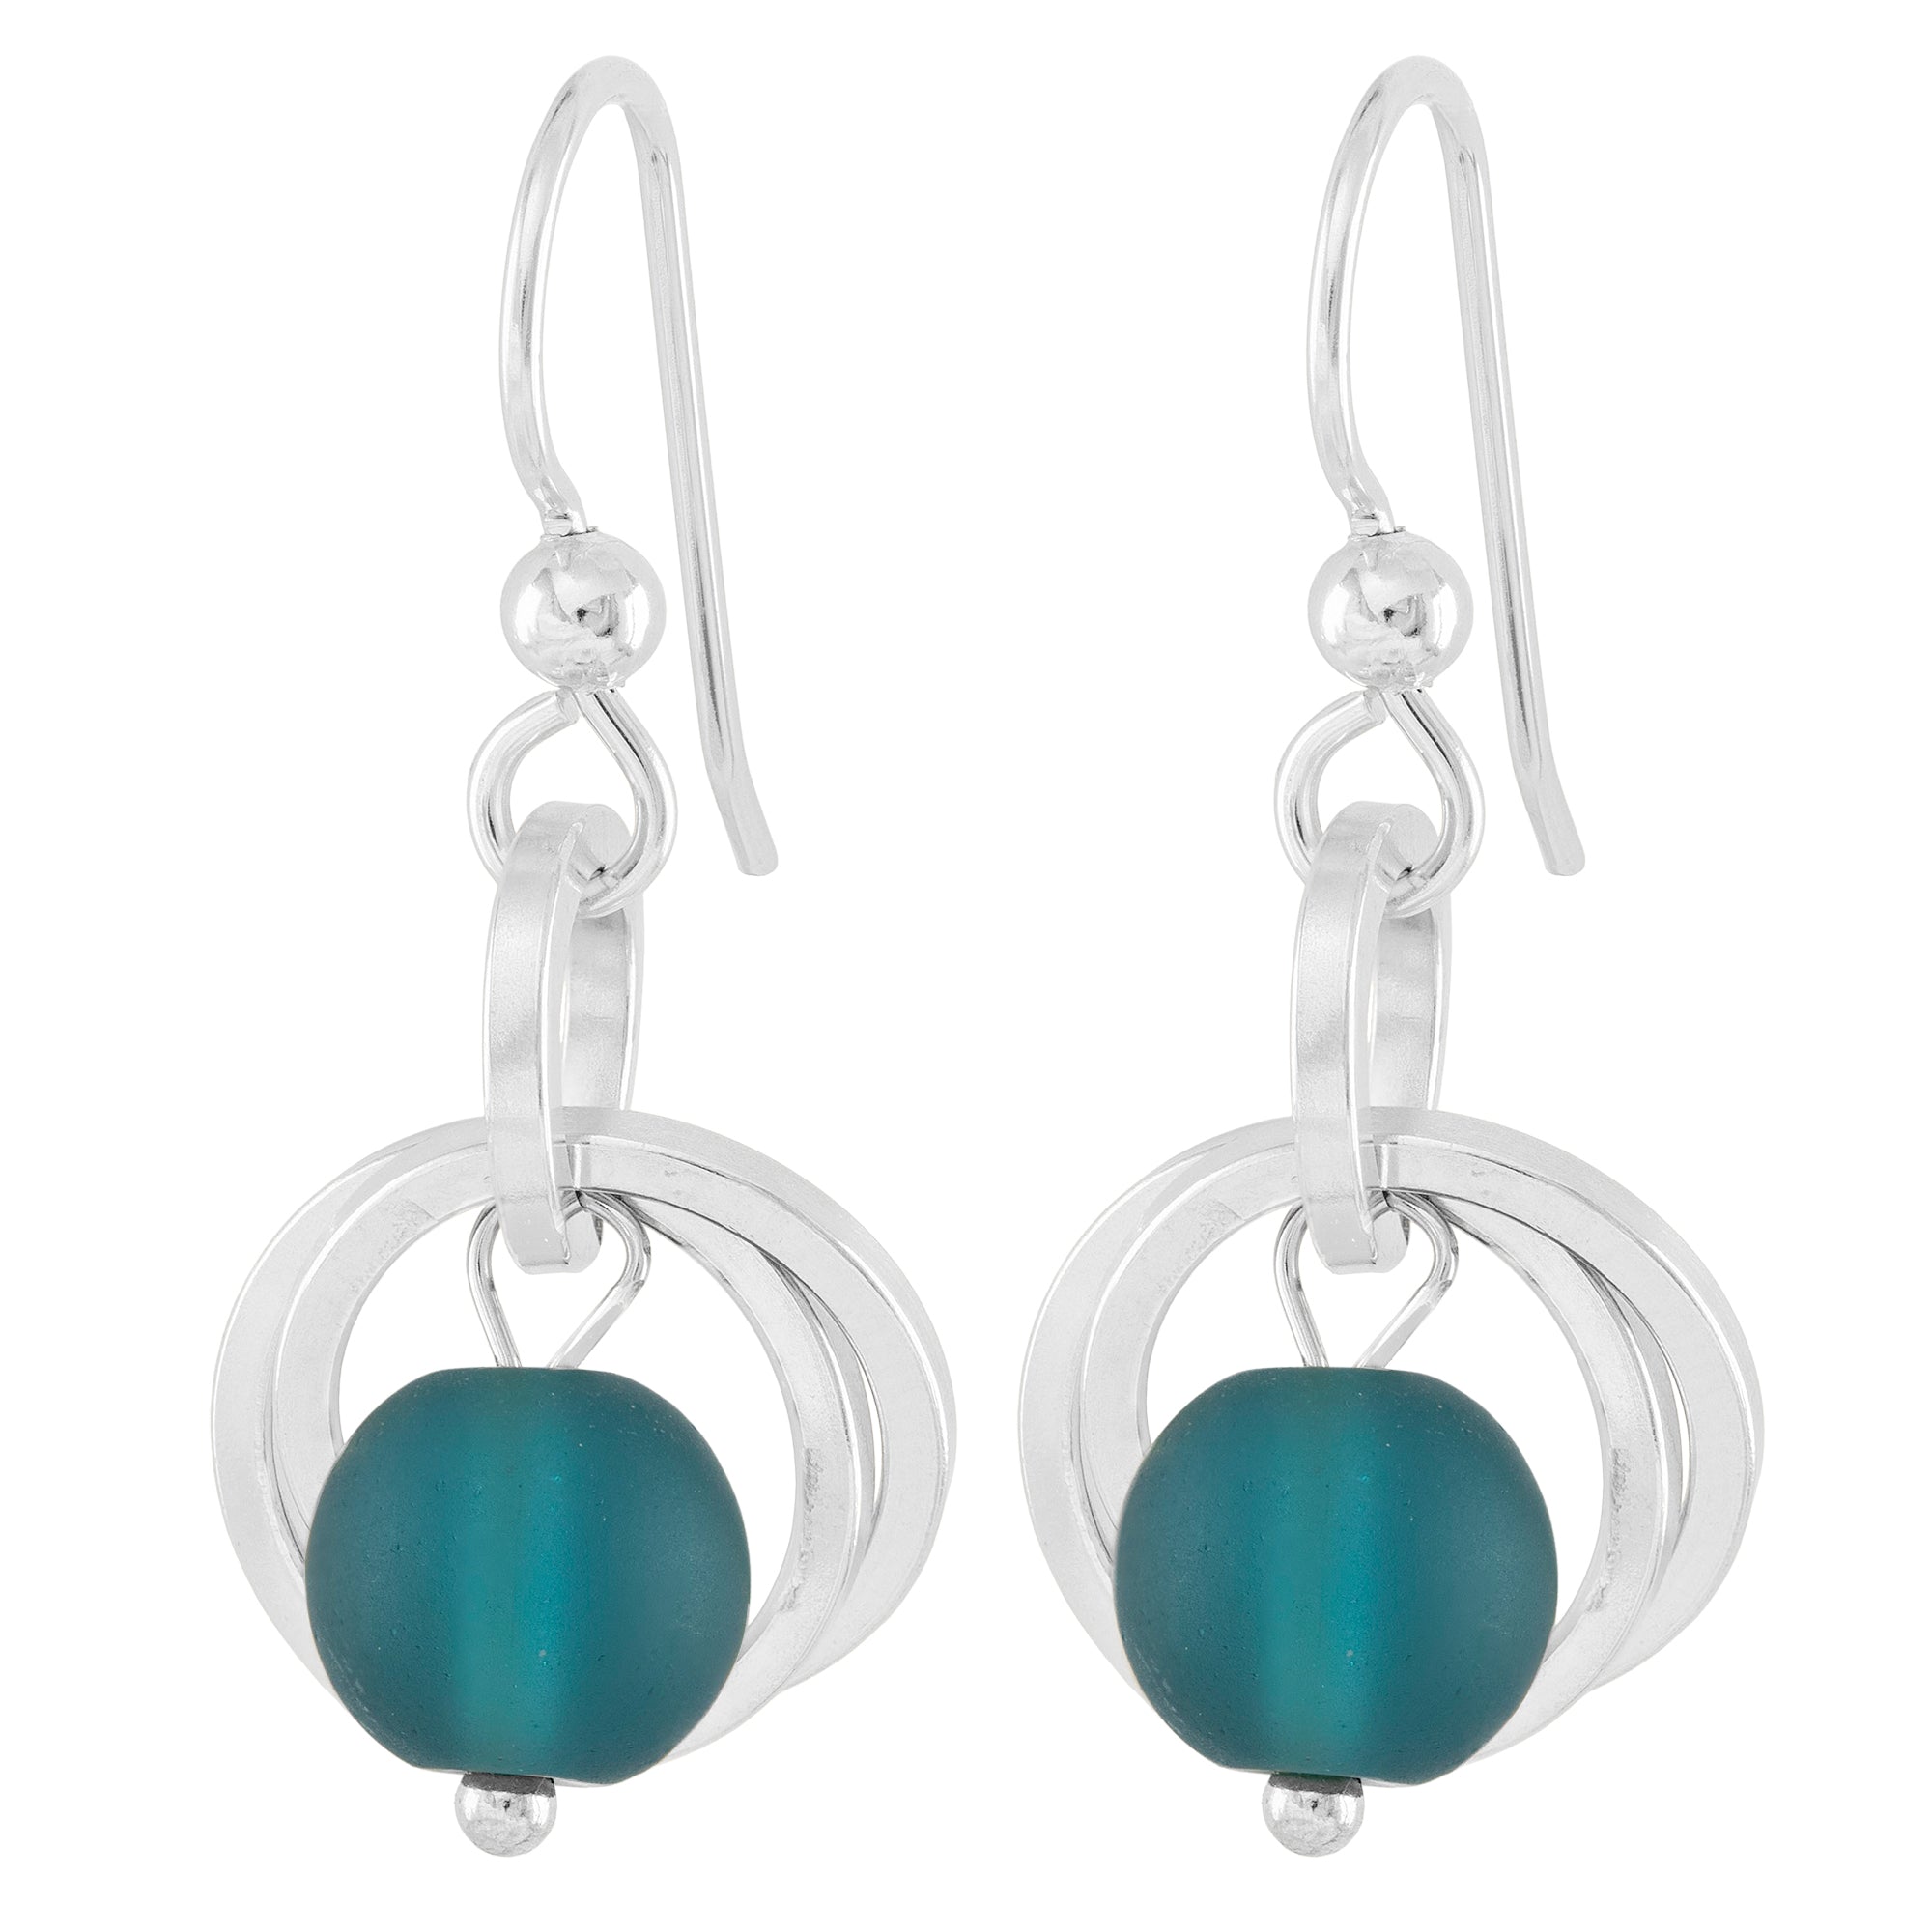 Teal Peacock Blue Recycled Glass Ball Dangle Earrings in Argentium Sterling Silver